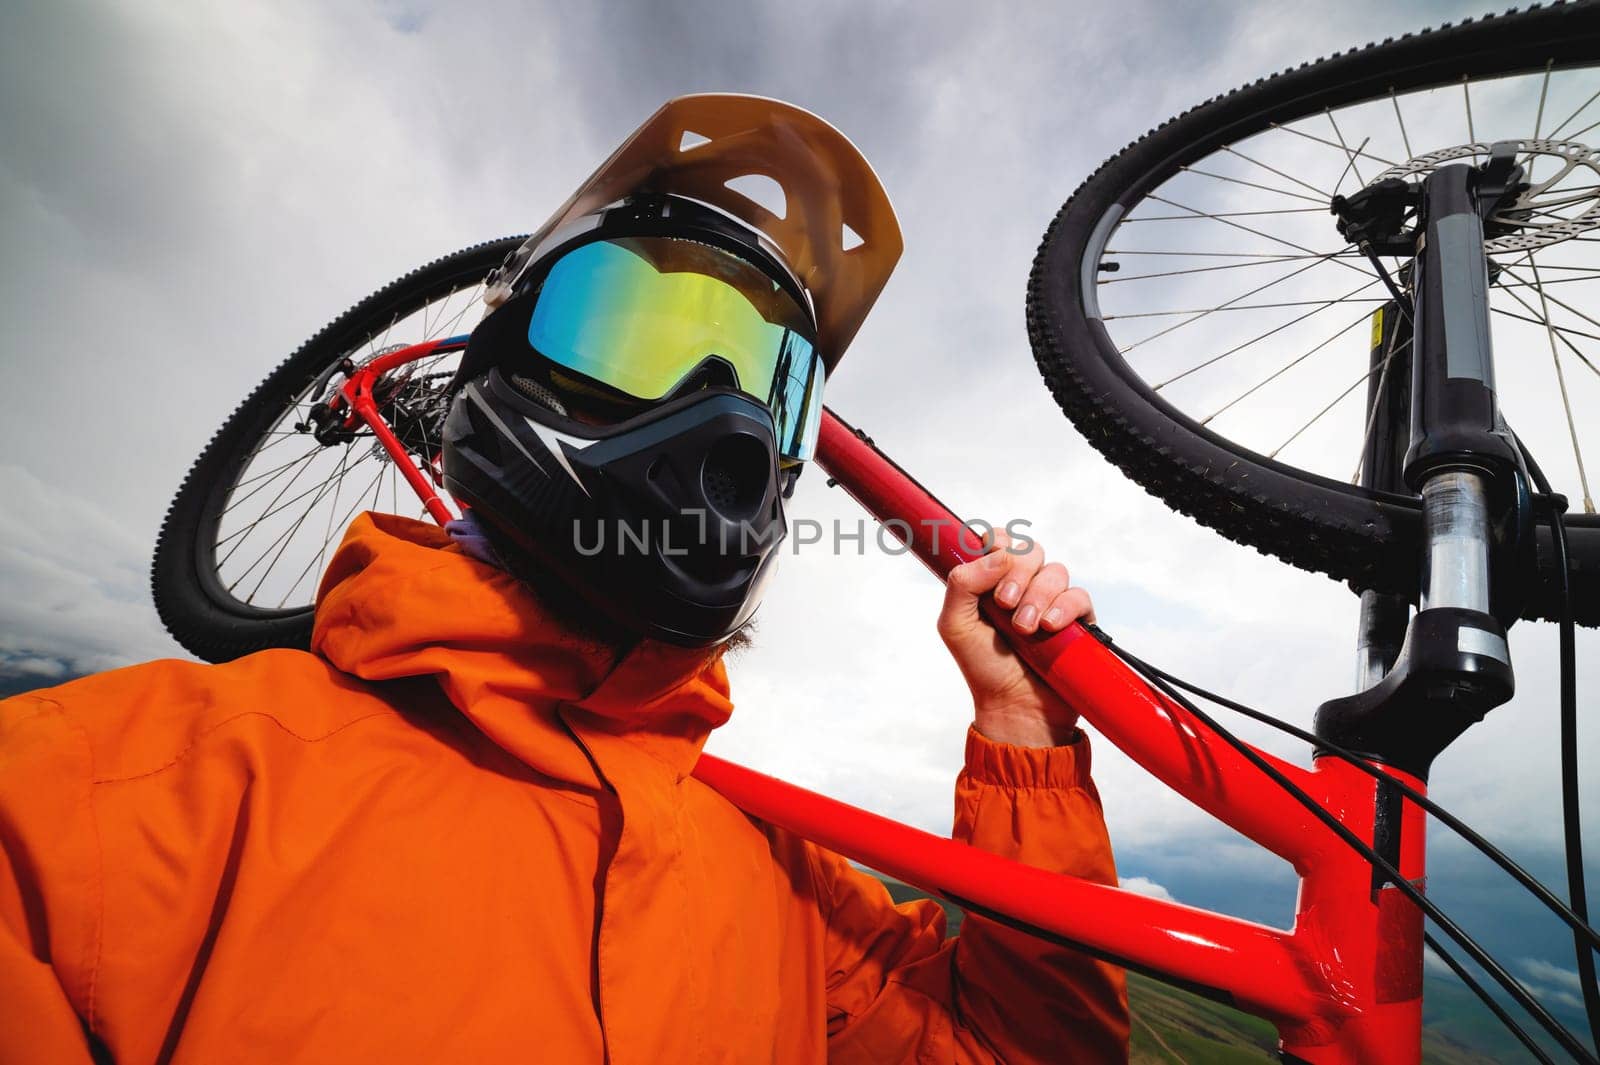 Wide angle vertical frame top angle. Portrait of a bearded mountain biker with his bicycle against a background of mountains and clouds in the summer surrounded by green grass.